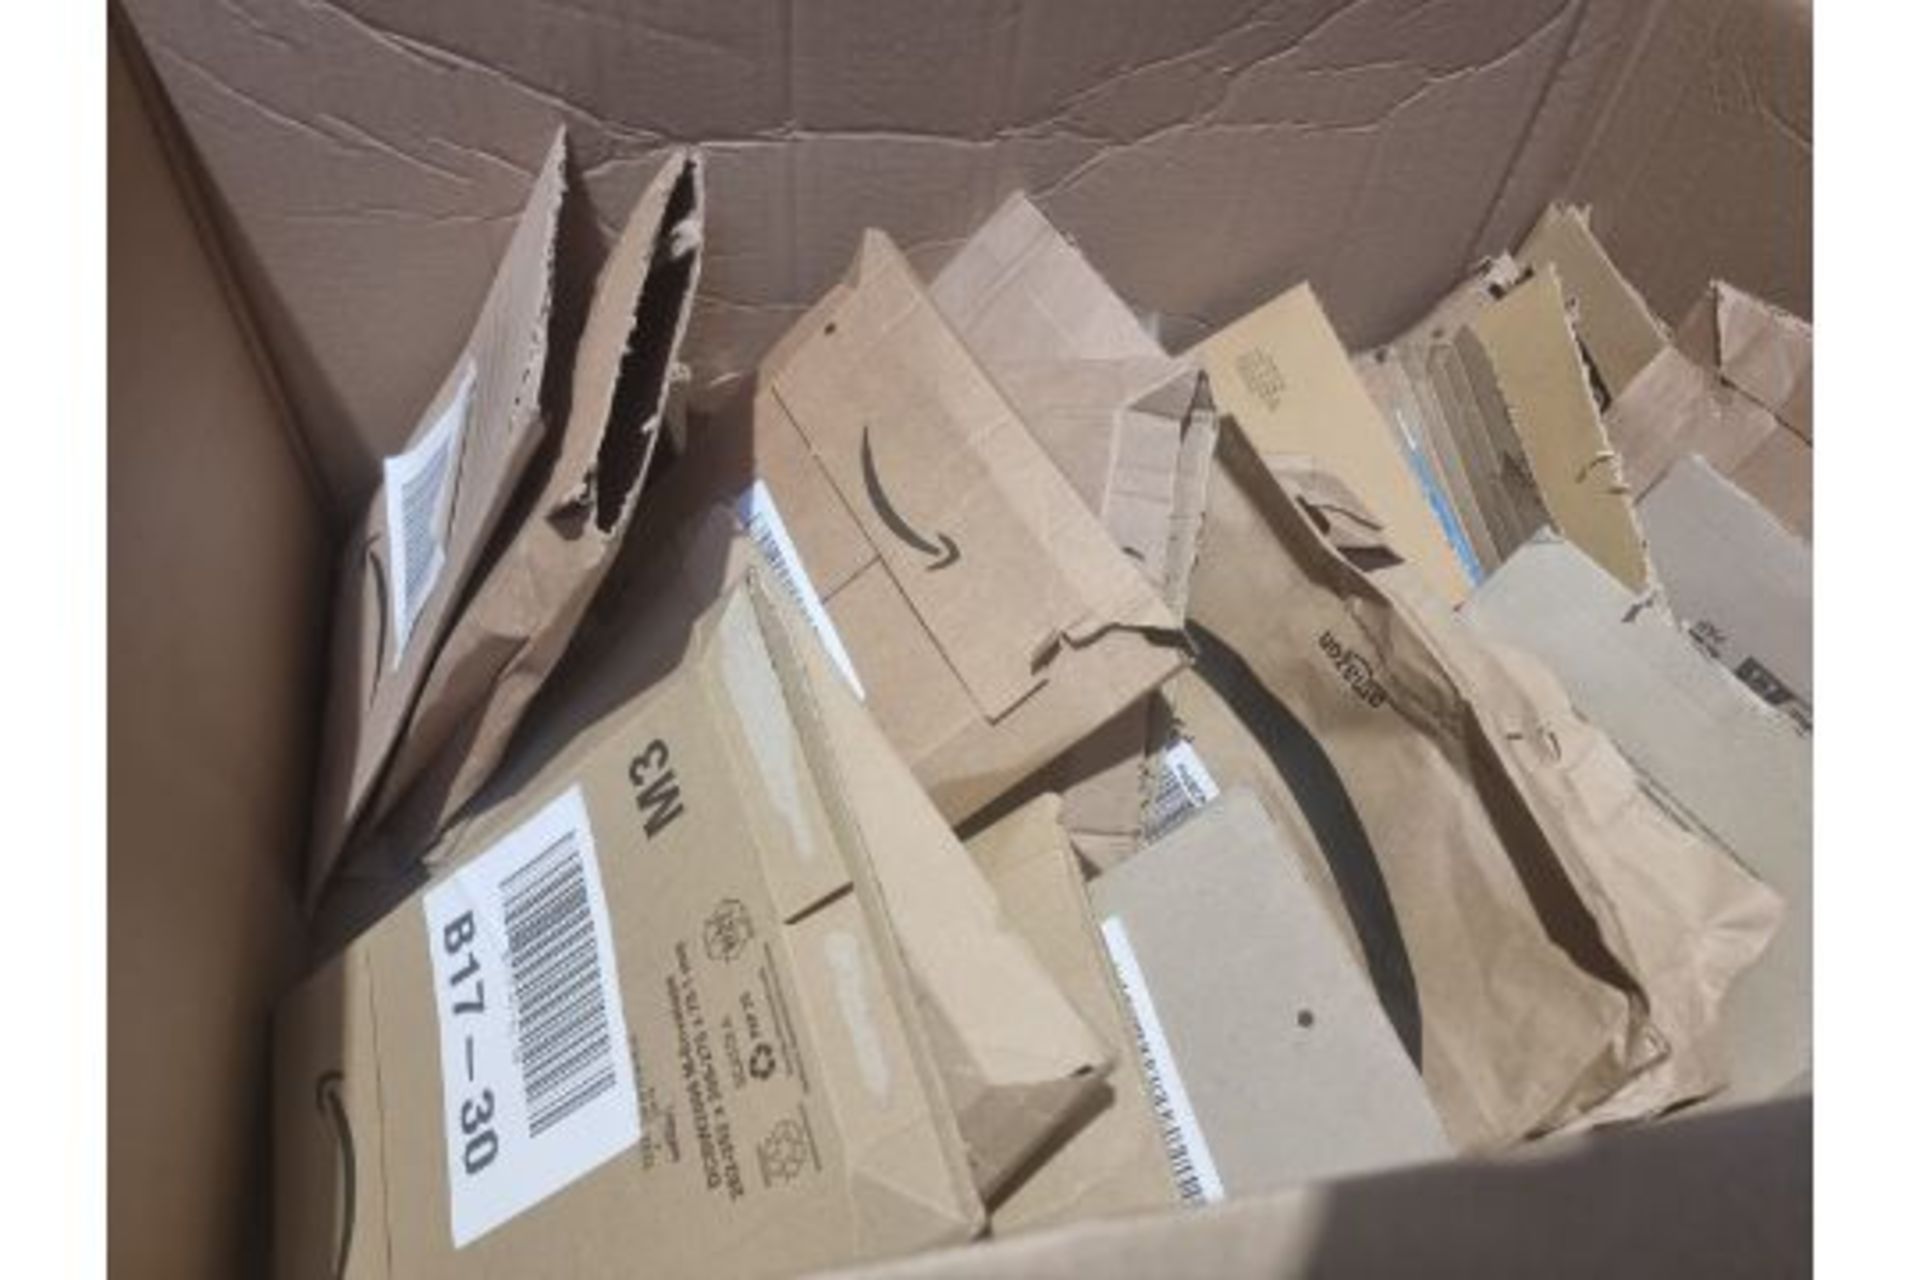 TRADE LOT TO CONTAIN 100 x MIXED BRAND NEW AMAZON OVERSTOCK ITEMS. ITEMS ARE PICKED RANDOMLY FROM - Image 5 of 29